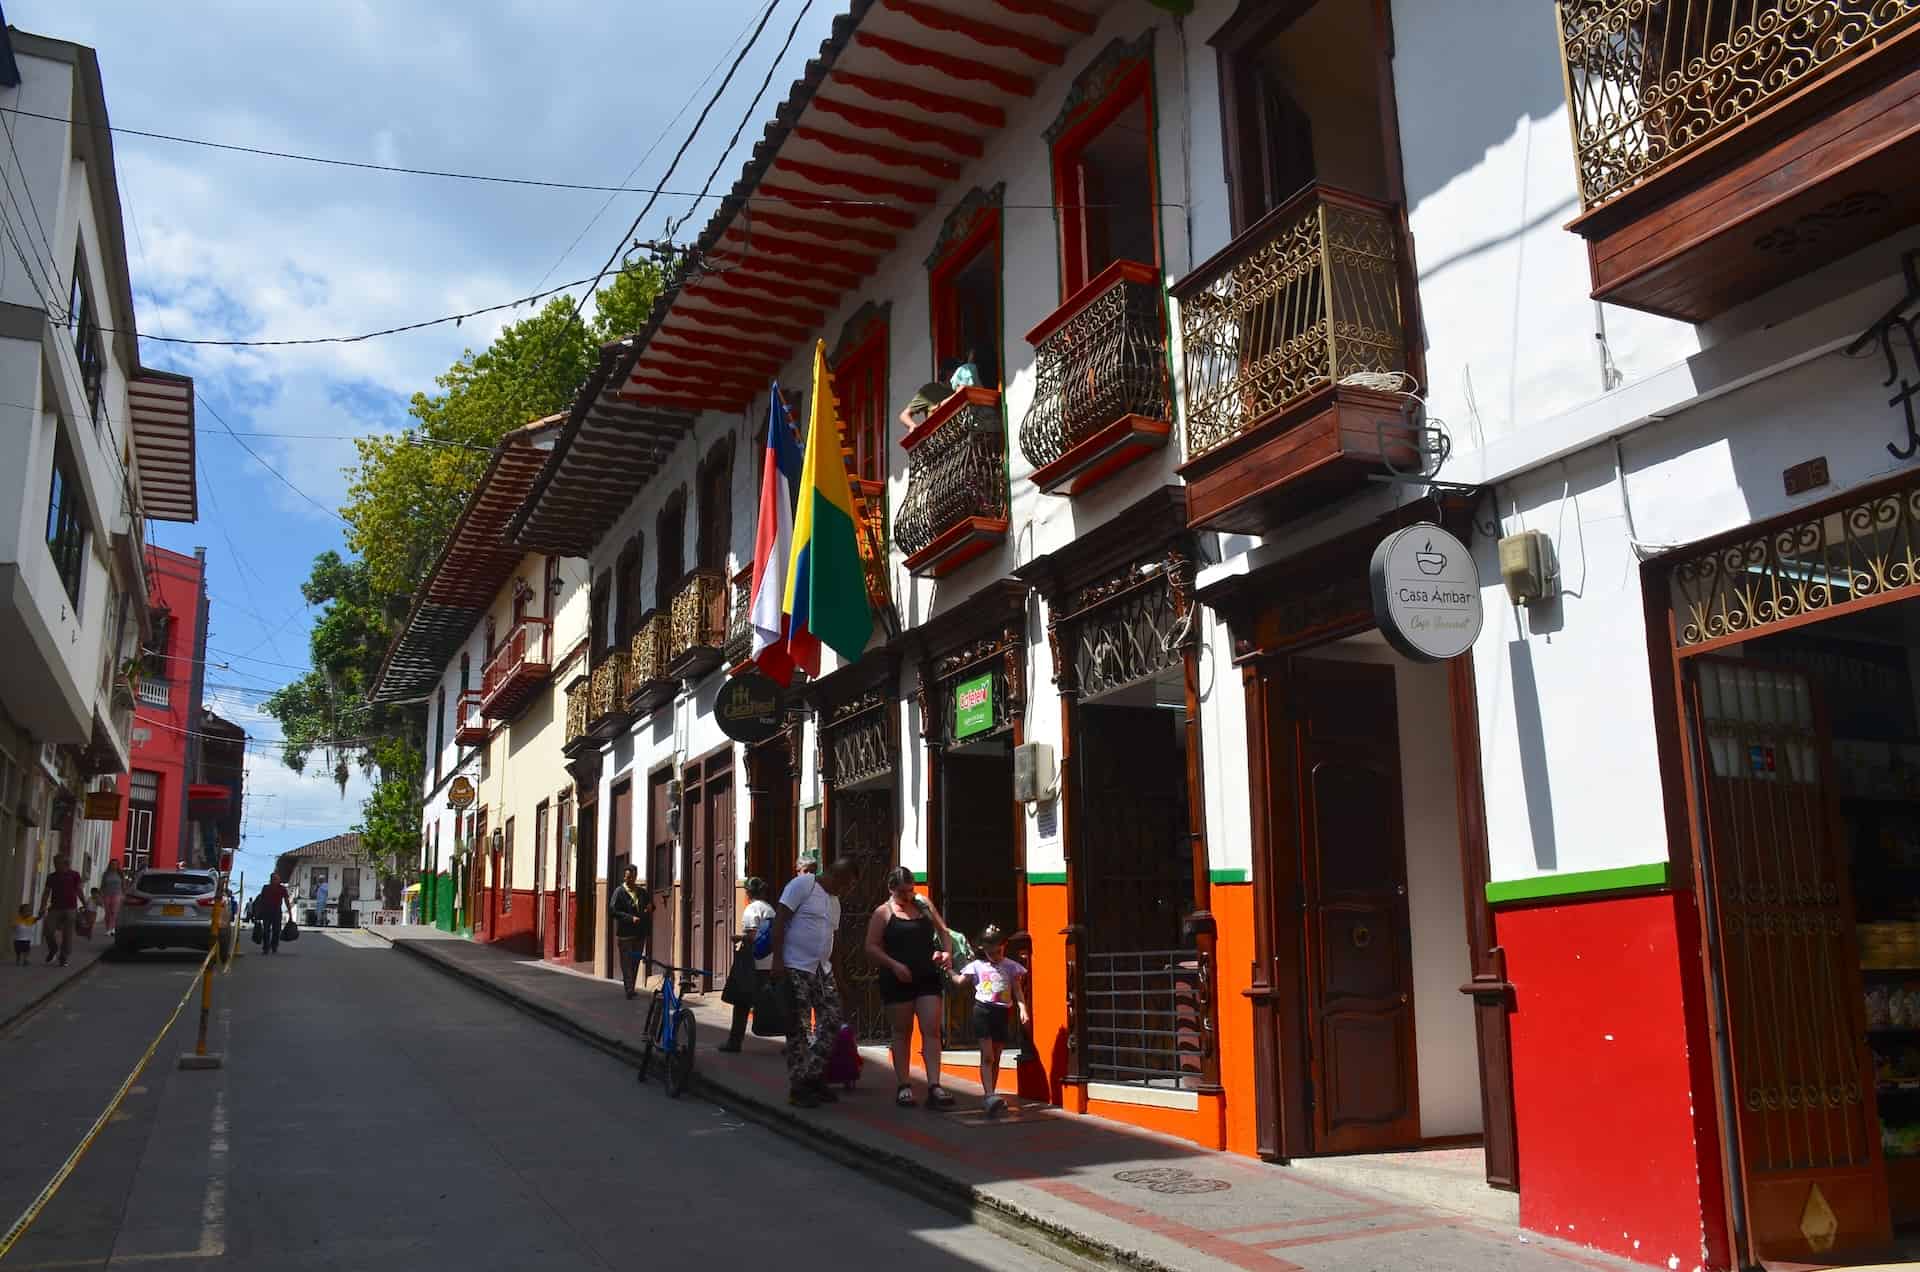 Calle Real in Salamina, Caldas, Colombia